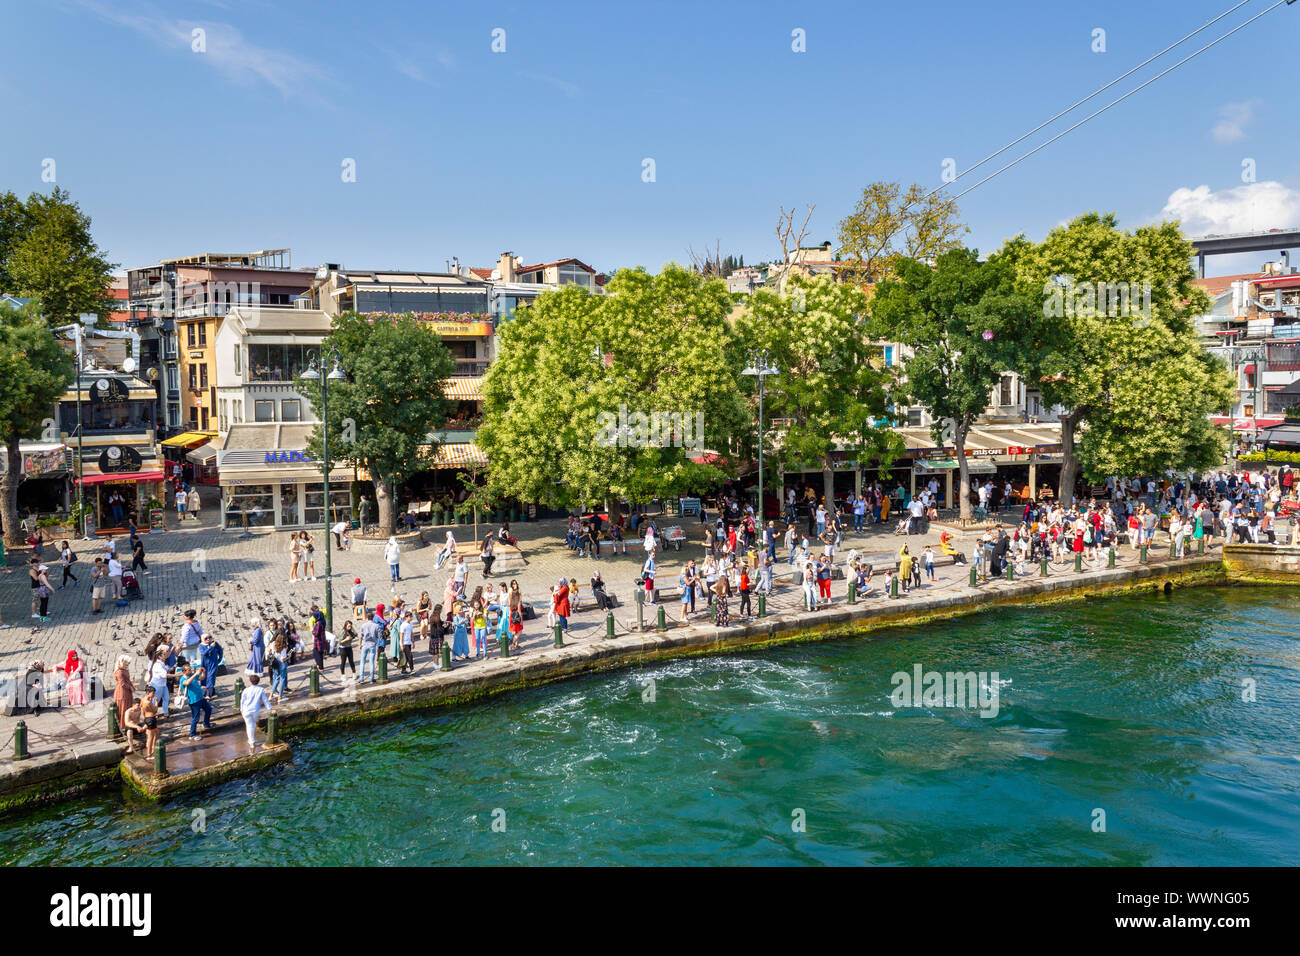 Ortakoy, Istanbul / Turkey - July 30 2019: Istanbul's populer touristic destination Ortakoy Square and peoples Stock Photo